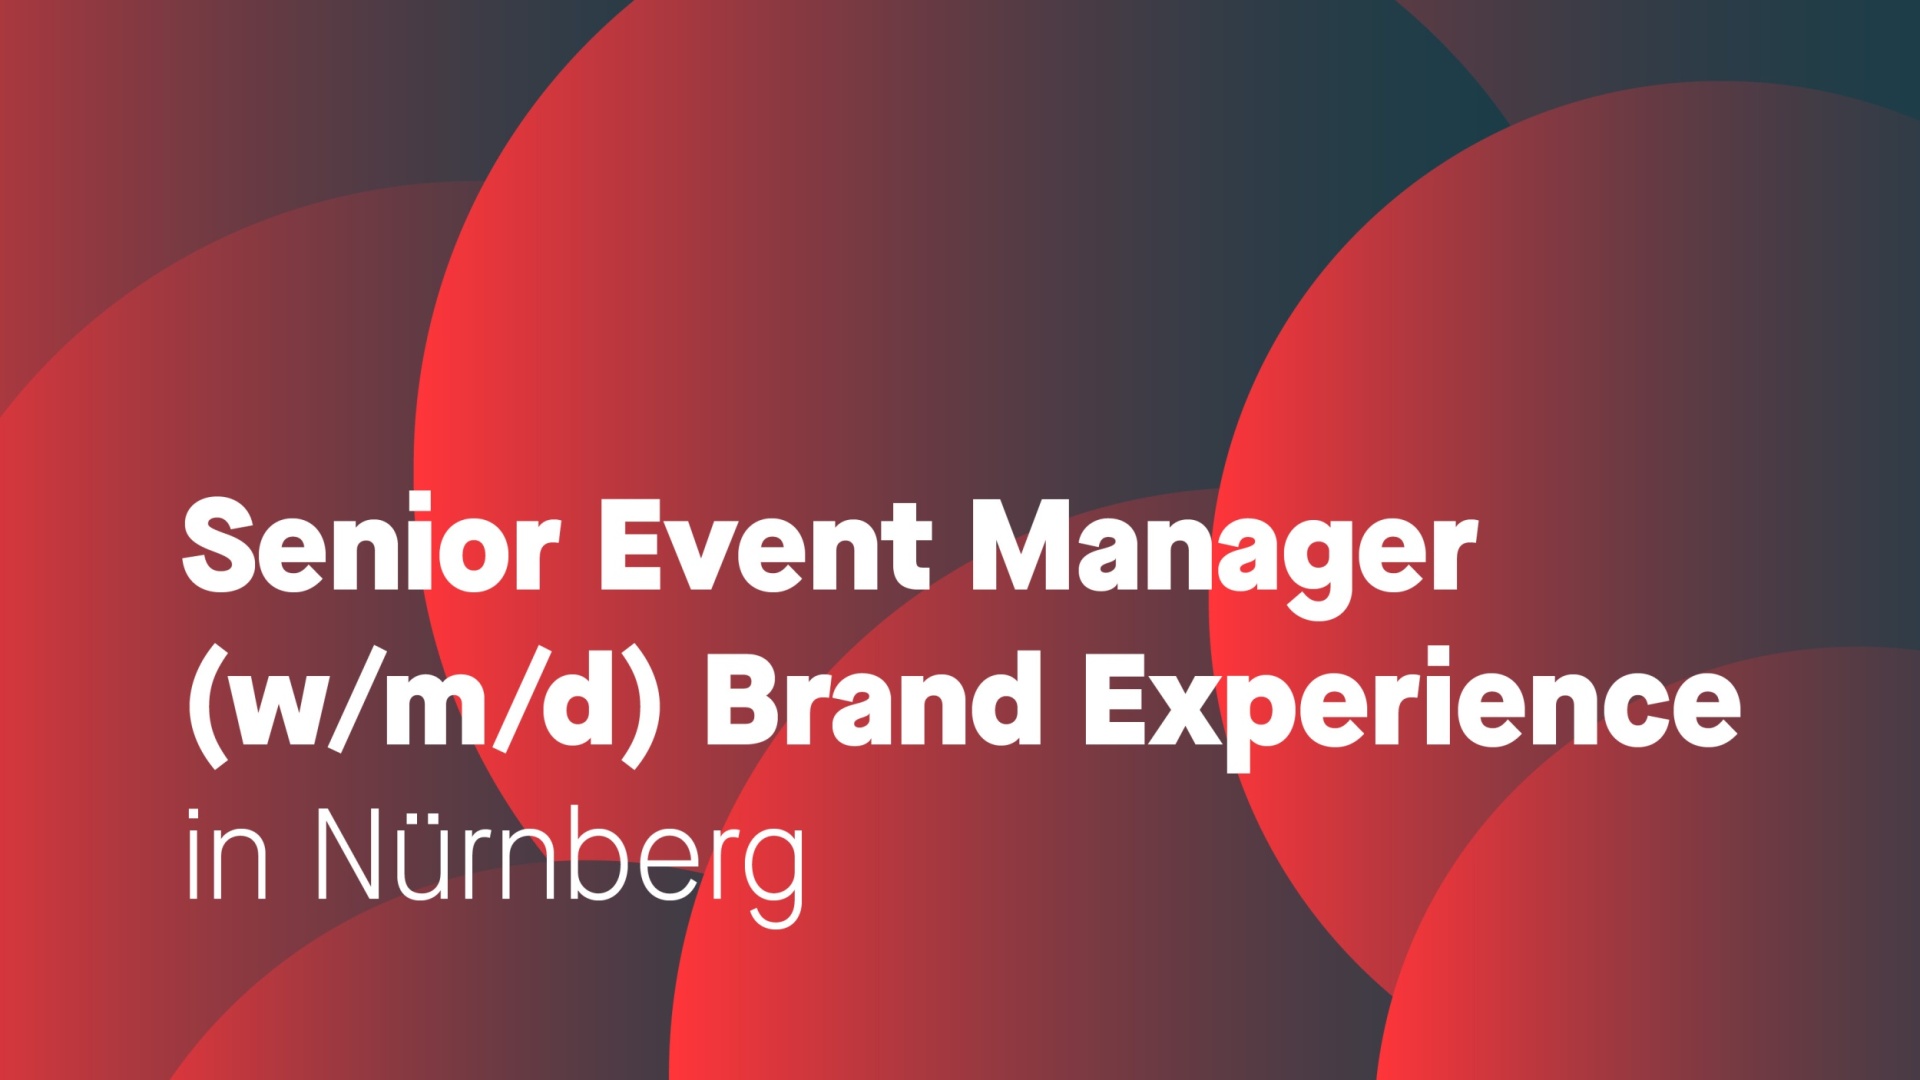 Senior Event Manager Brand Experience (w/m/d) 